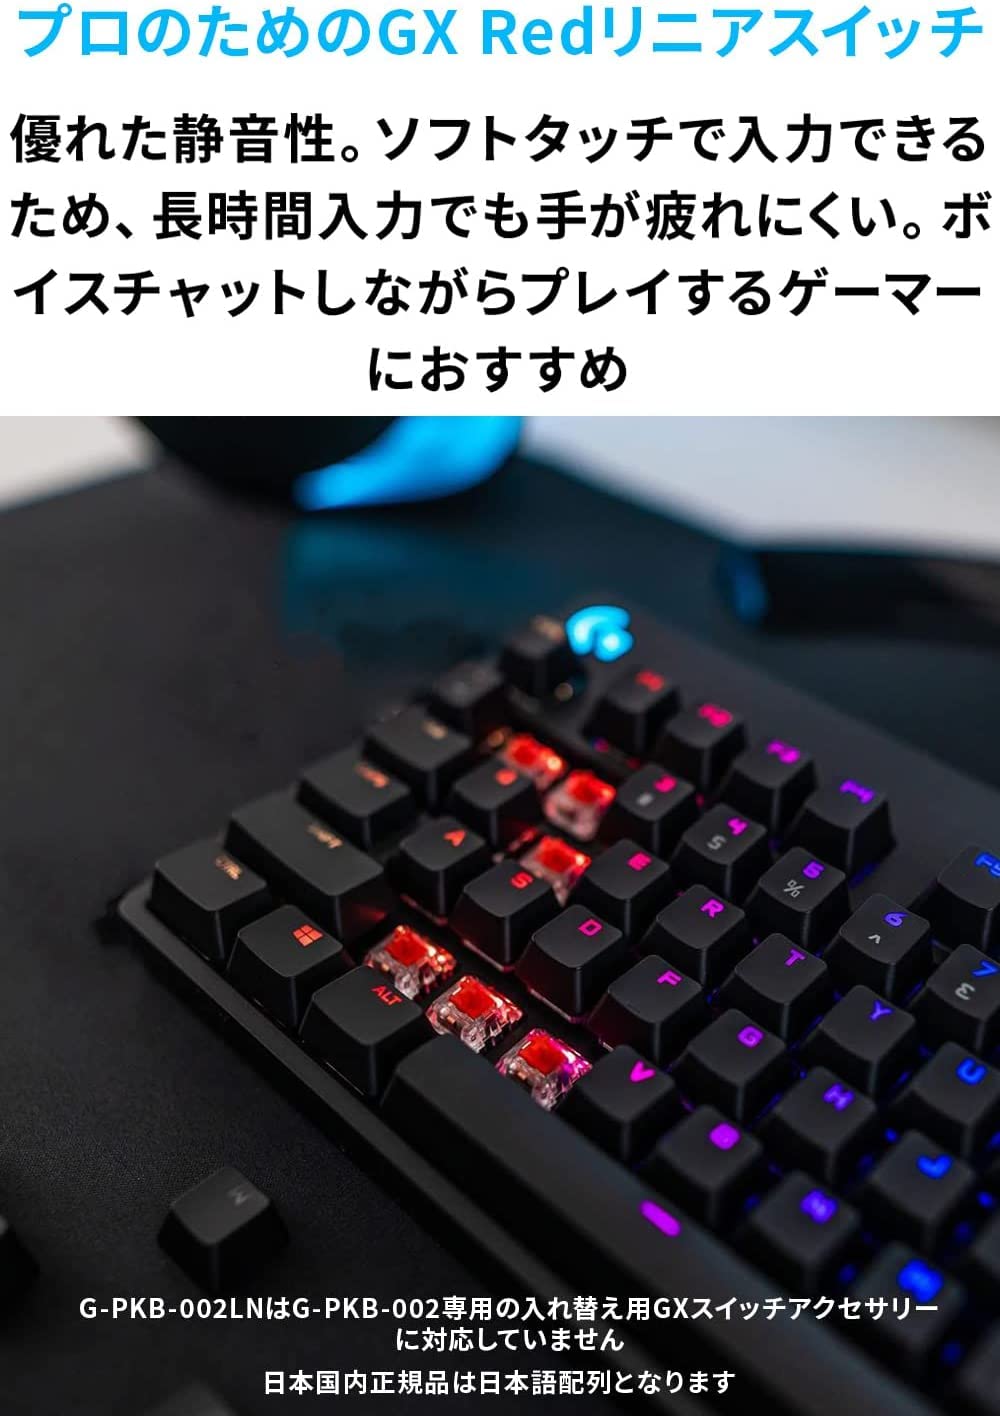 Logicool G PRO Gaming Keyboard, Numeric Keypadless, GX Switch, Linear Wired Mechanical Keyboard, Quiet, Japanese Layout, RGB Detachable Cable, G-PKB-002LNd, Genuine Domestic Product, 1 Year Manufacturer's Warranty *Cannot be replaced with GX switch sold s